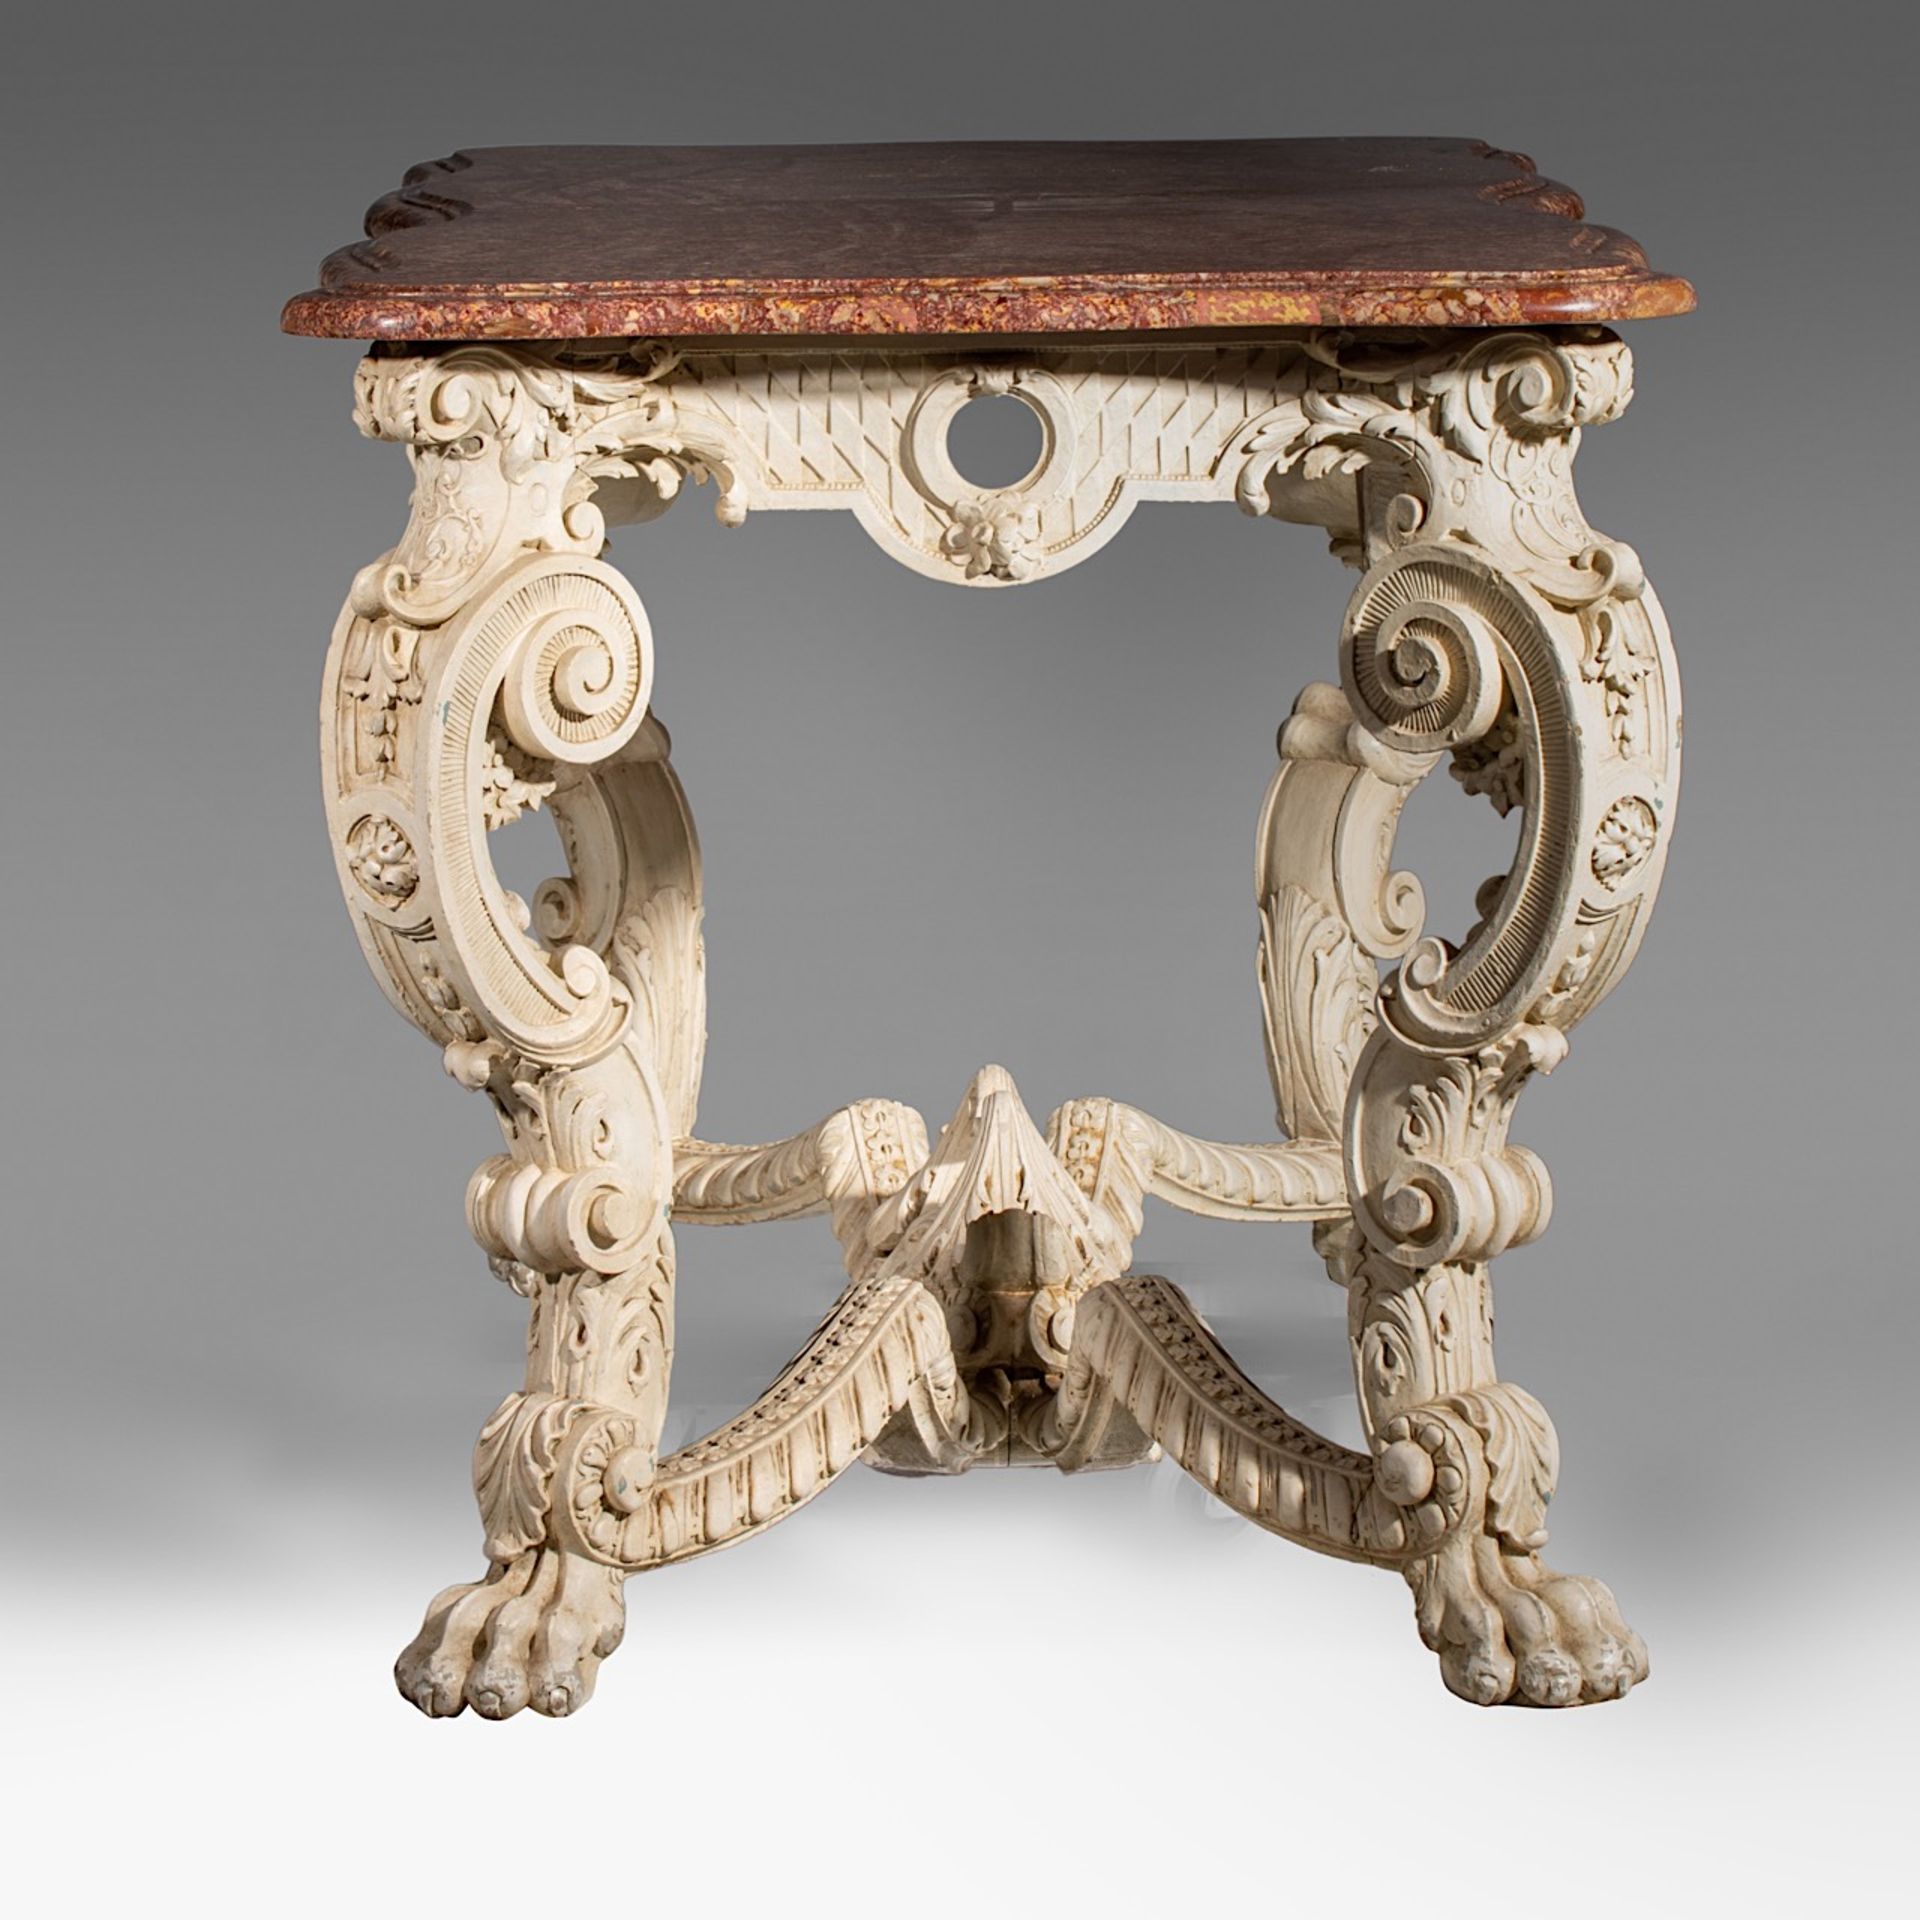 An imposing Louis XIV-style 'console de milieu' with a brocatelle marble, 19thC, H 81,5 - W 147 - D - Image 3 of 11